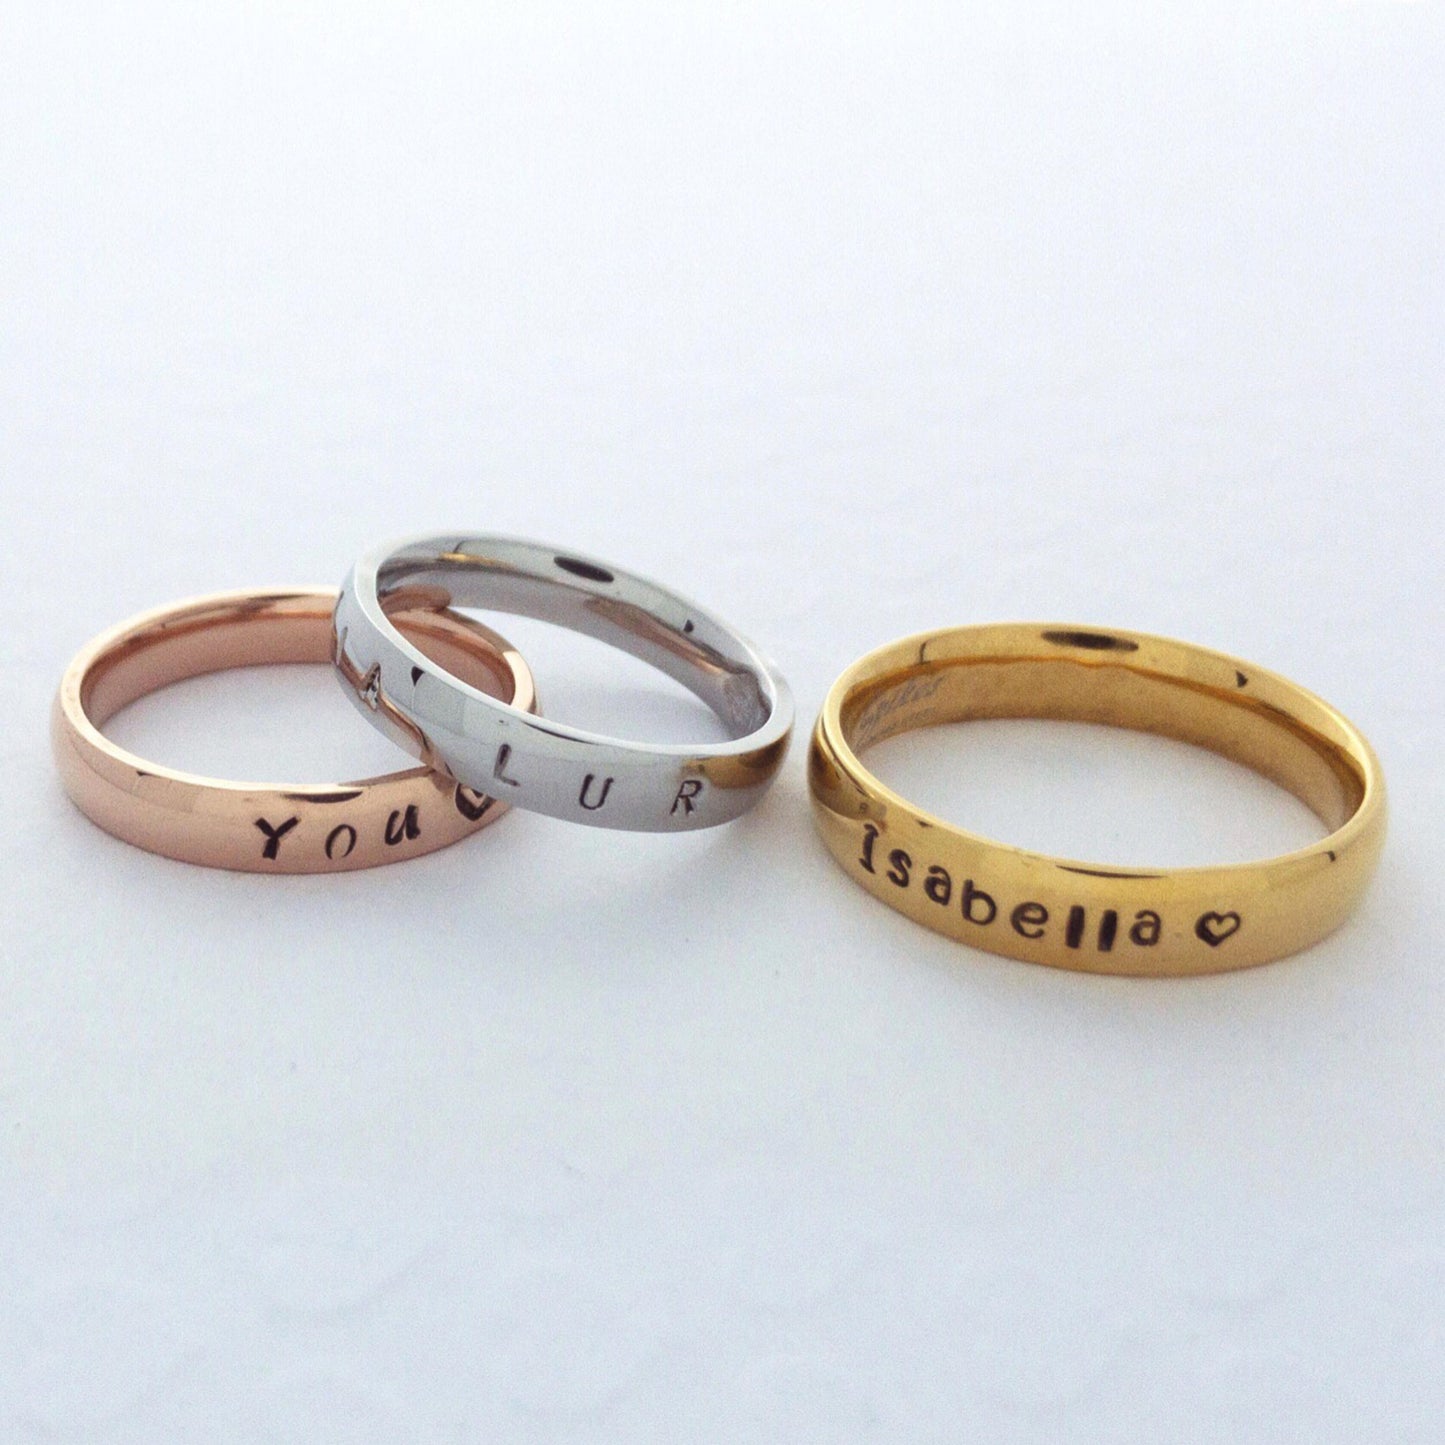 Personalized Name Ring Hand stamped Ink Filled Gold Silver Plated